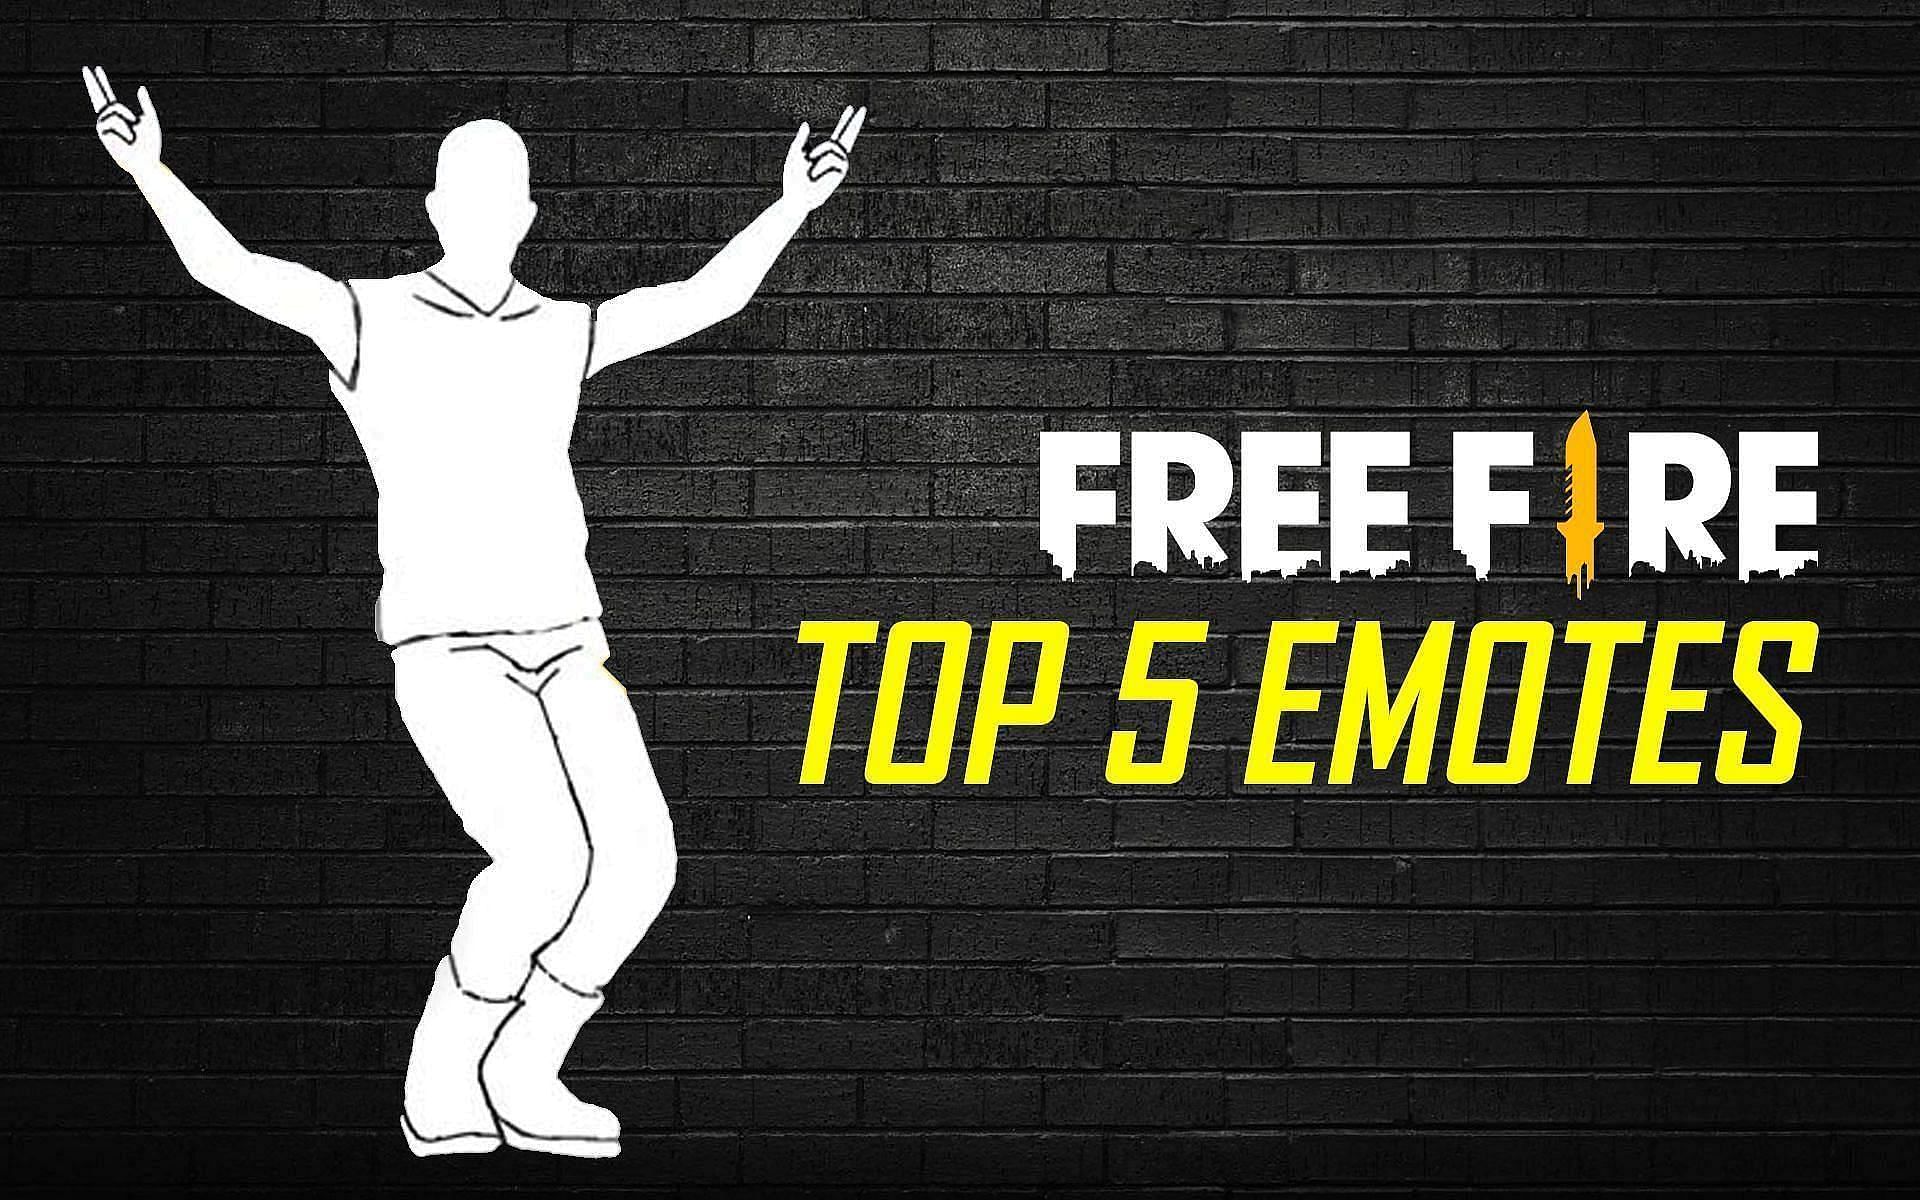 The best emotes that users can acquire in Free Fire right now (Image via Sportskeeda)